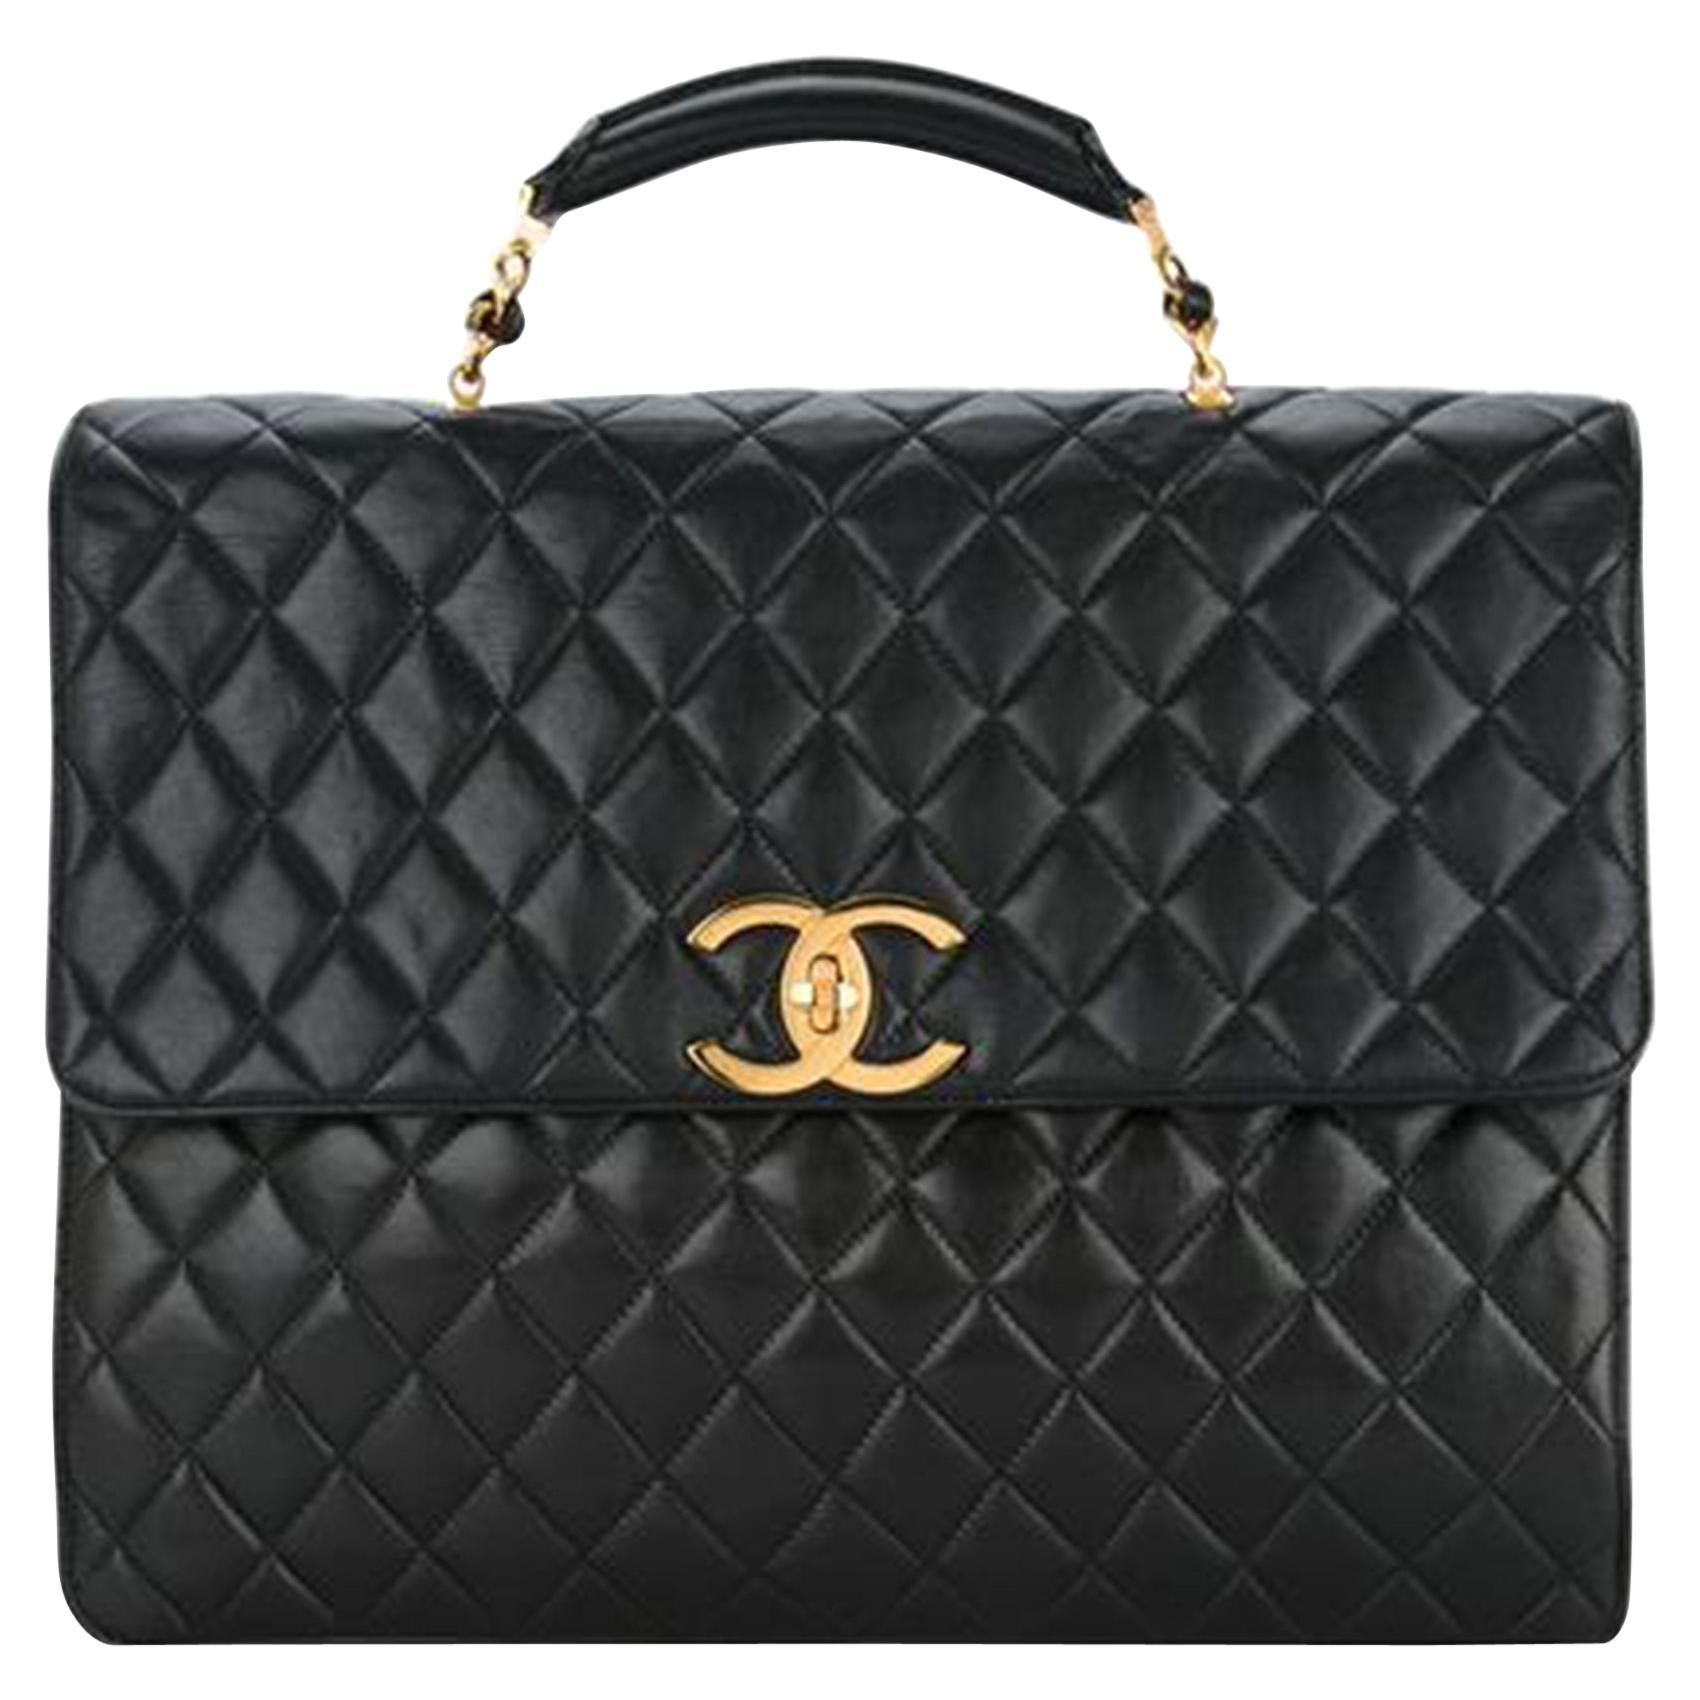 Chanel extra large quilted lambskin briefcase with gold CC clasp